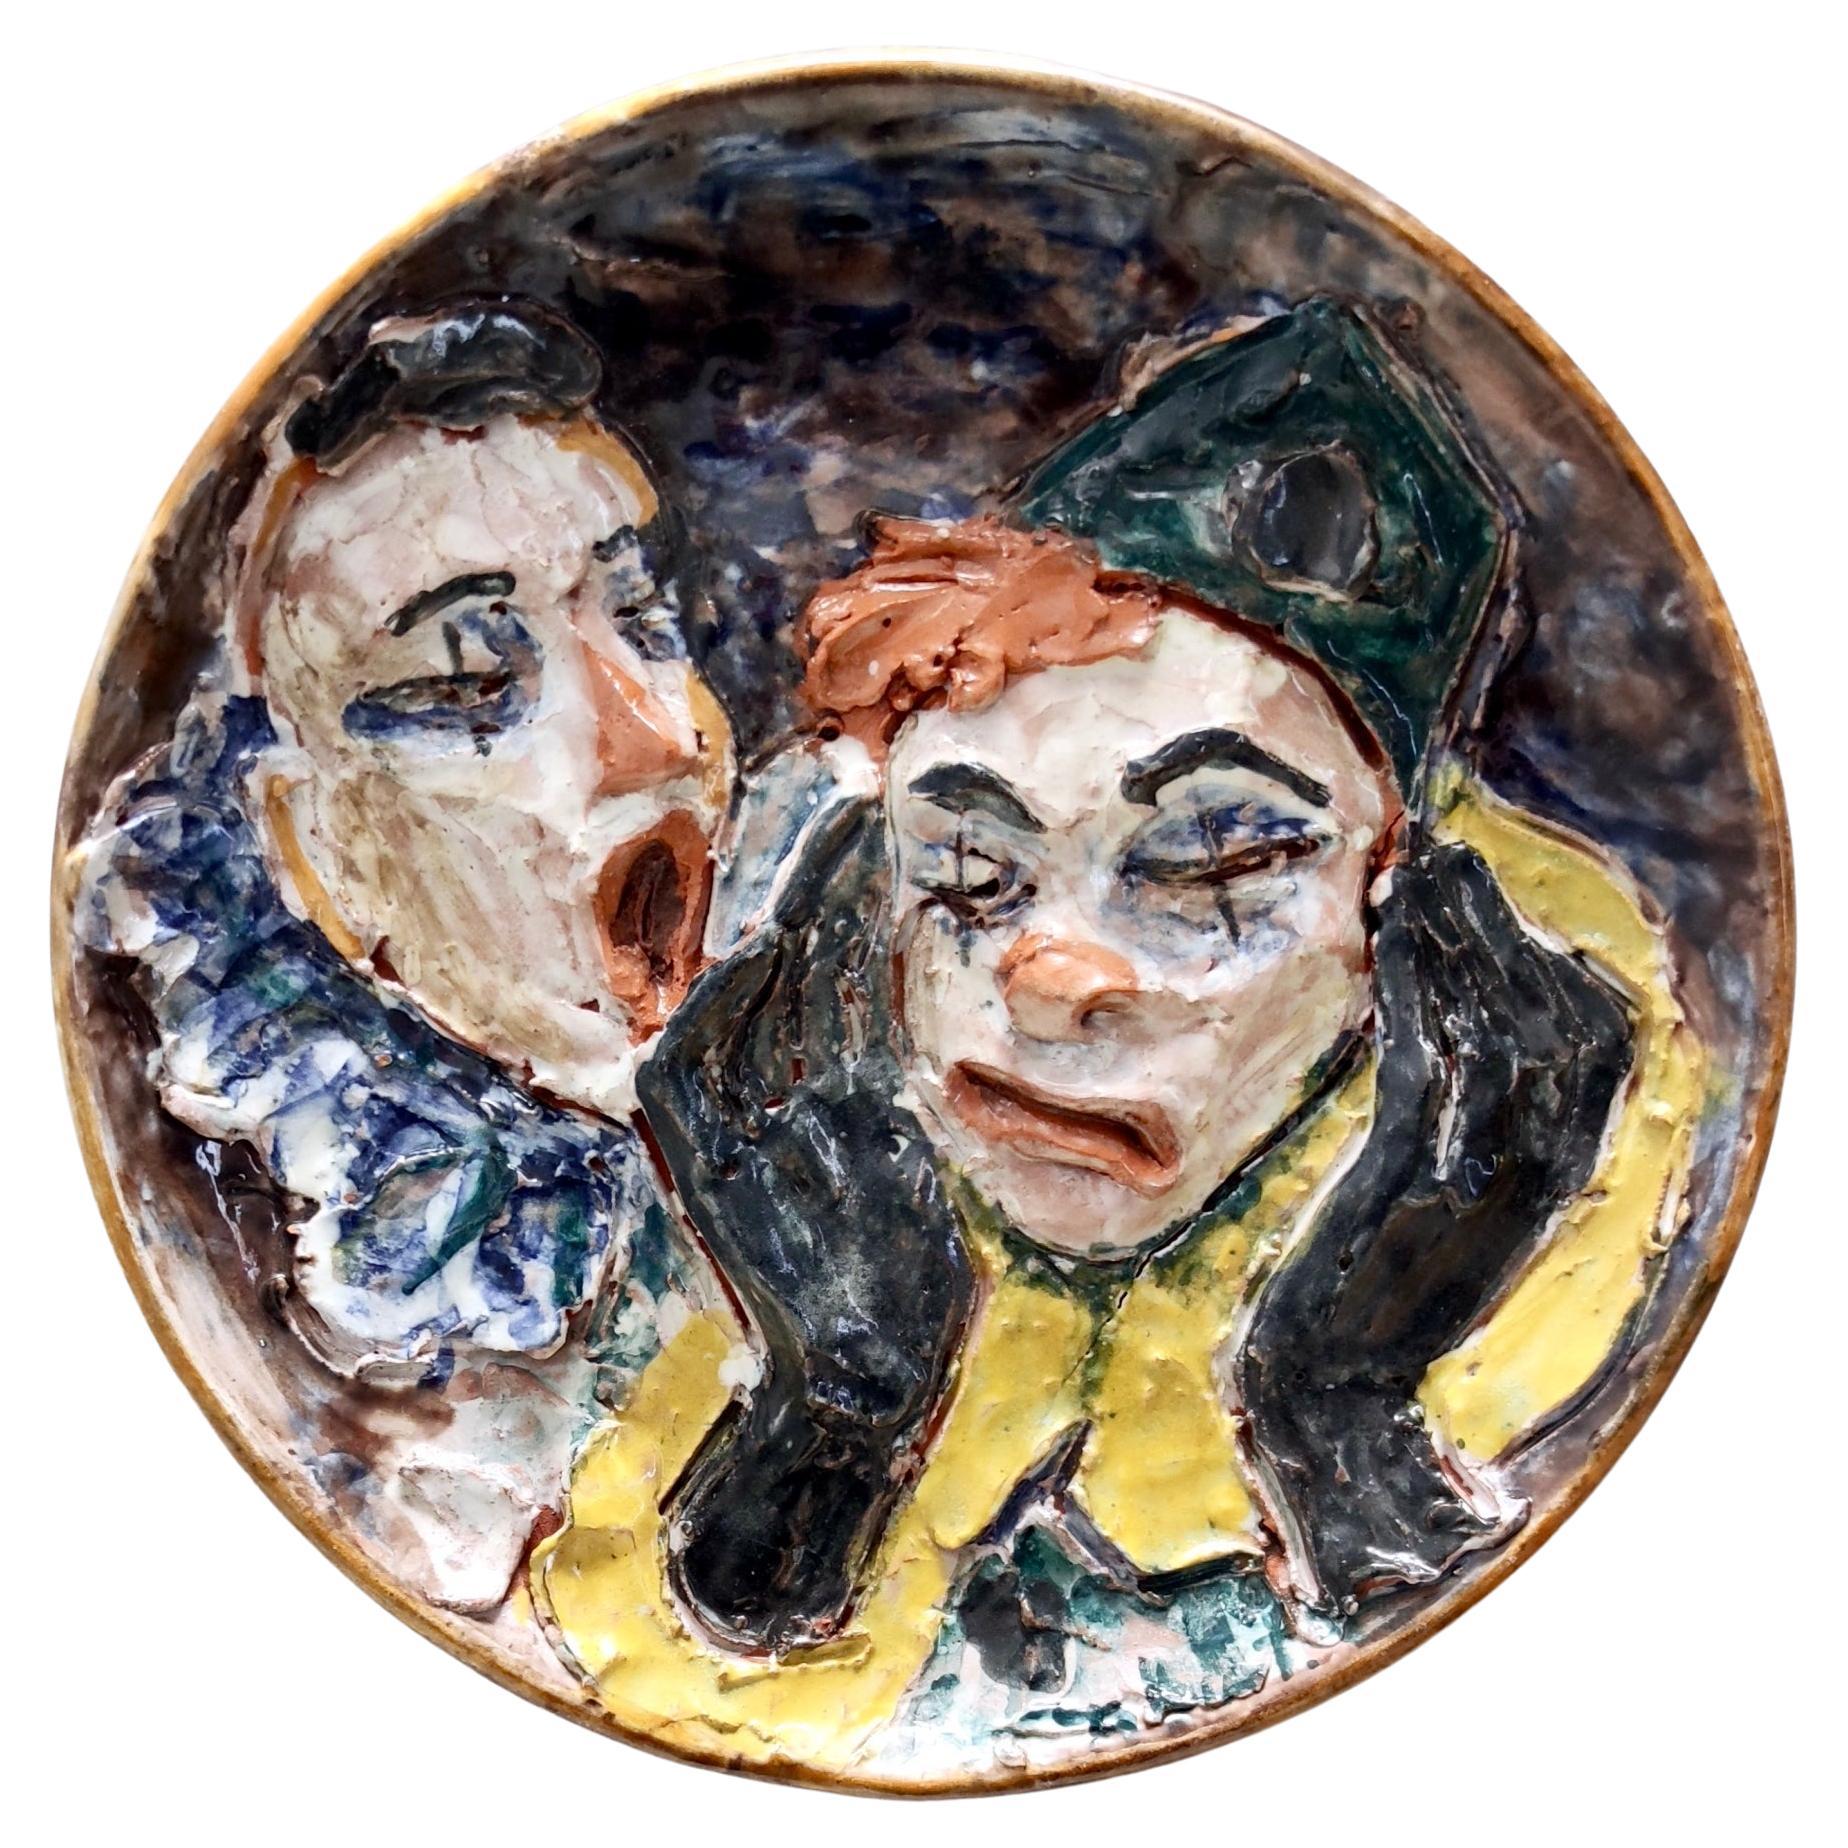 Vintage Glazed Ceramic Plate with Two Clowns, Italy